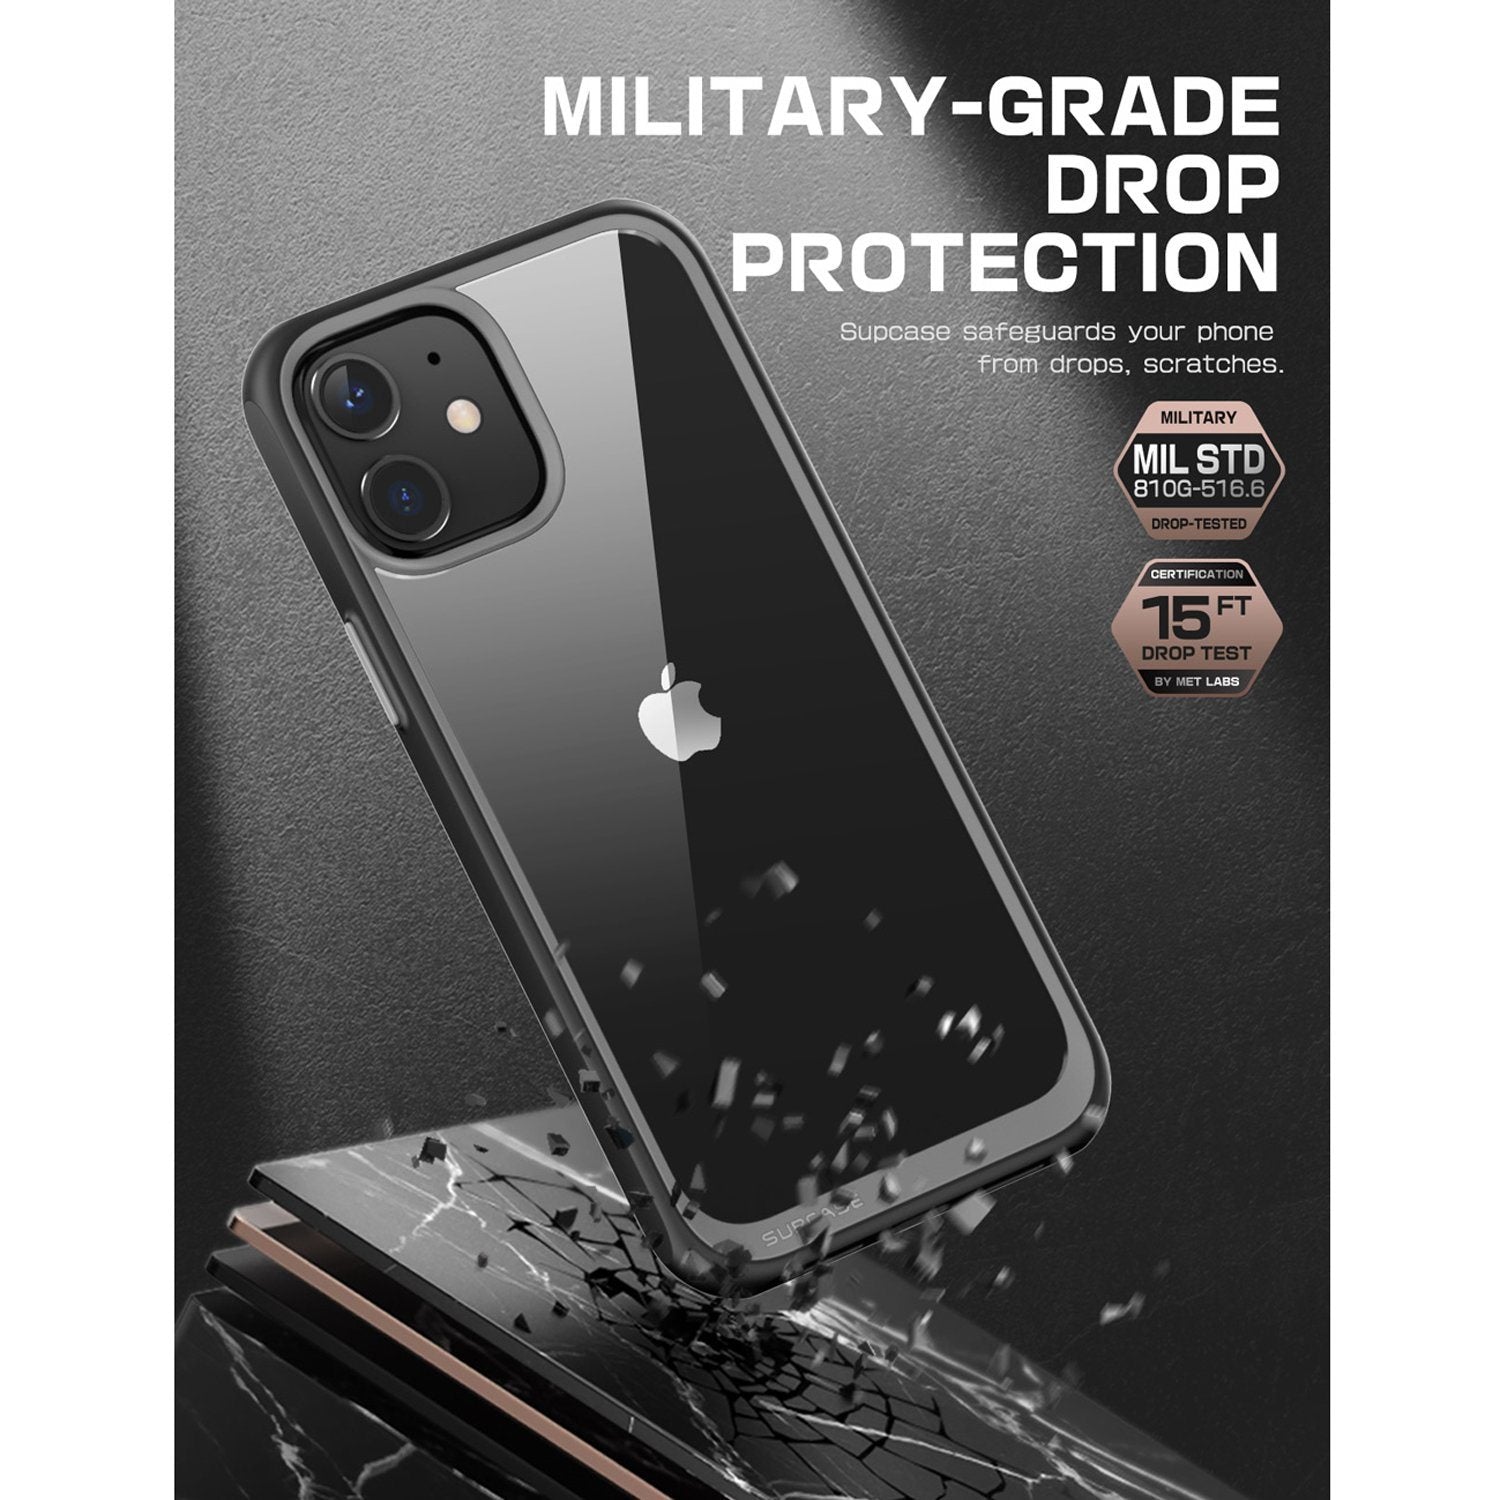 Supcase Unicorn Beetle Style Series Hybrid Protective Clear Case for iPhone 12 mini 5.4"(2020)